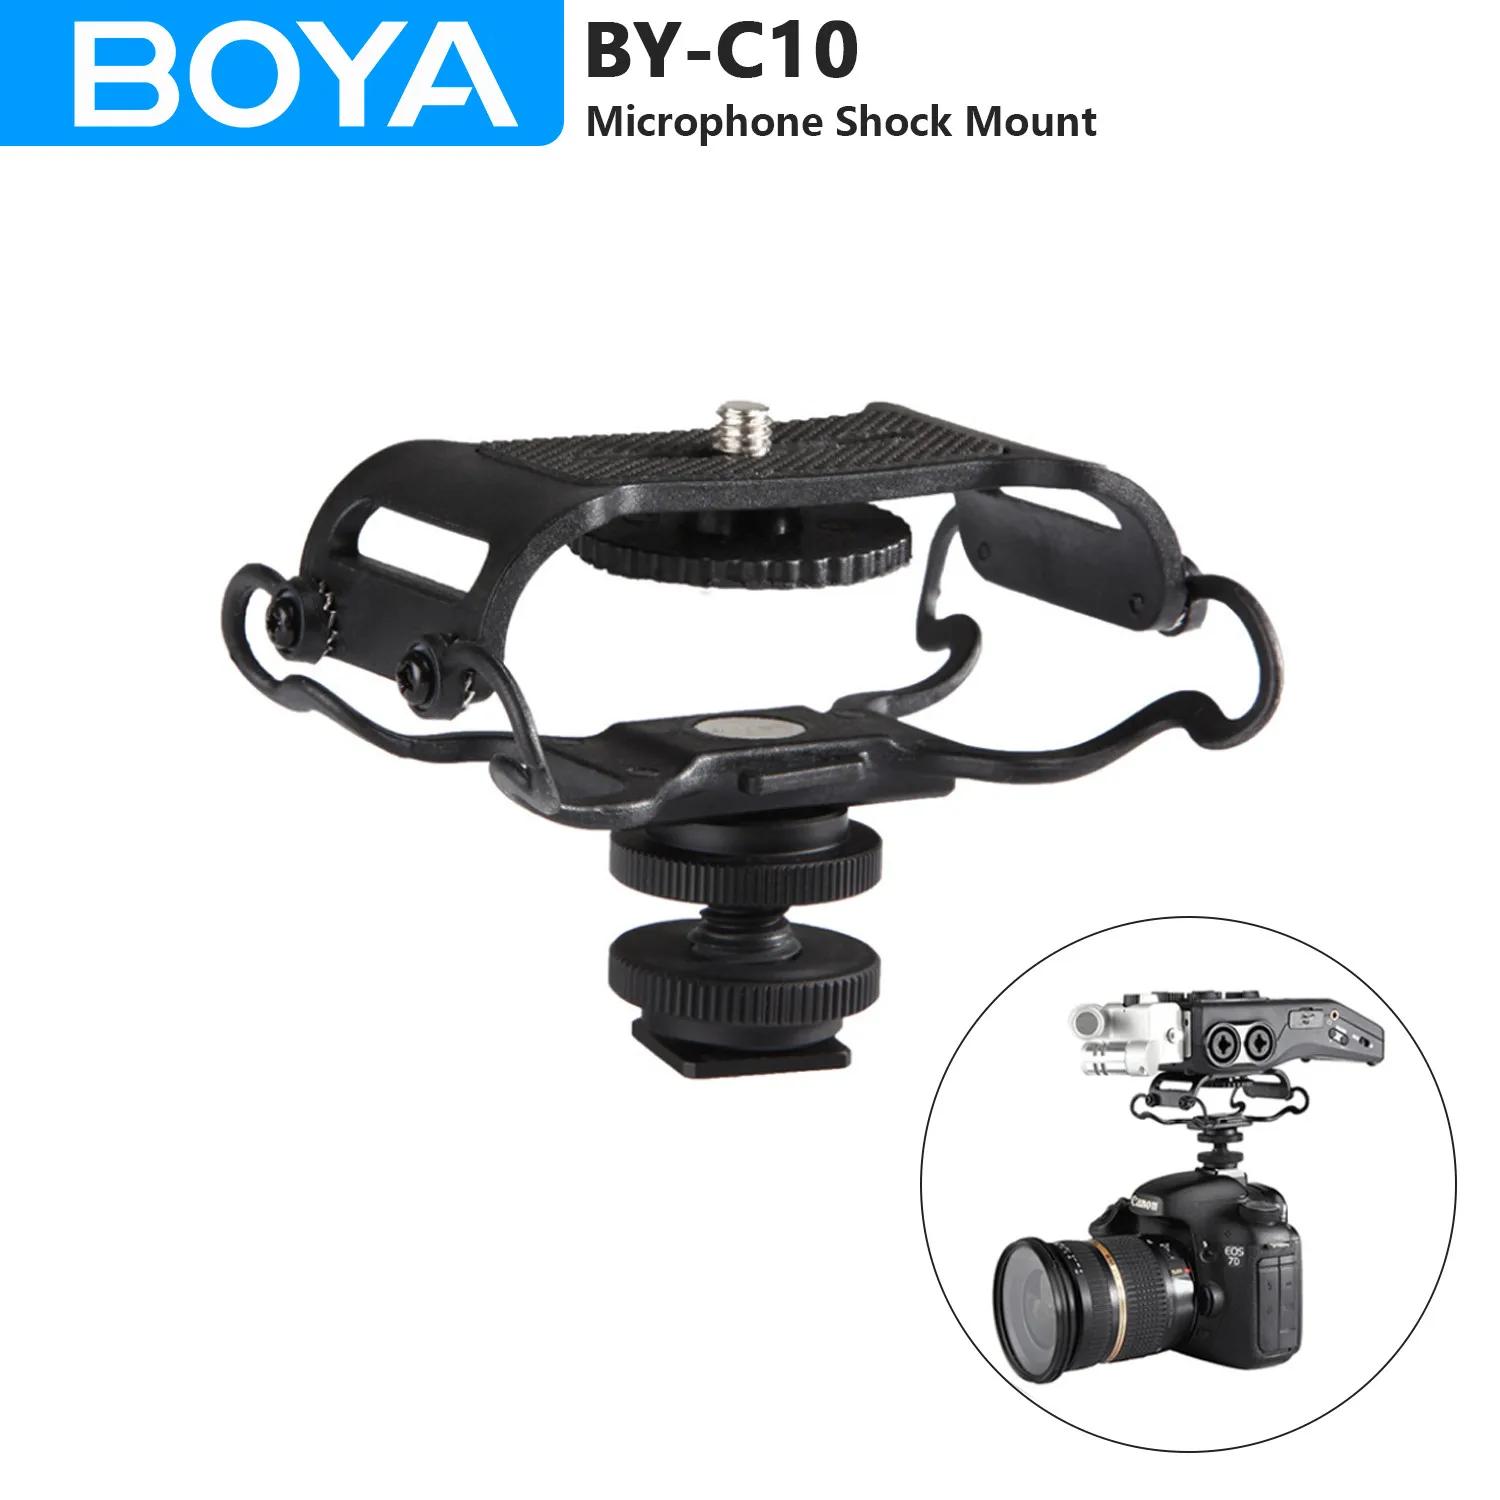 

BOYA BY-C10 Microphone Shock Mount for Zoom H4n/H5/H6 for Sony Tascam DR-40 DR-05 Recorders Microfone Shockmount Olympus Tascam